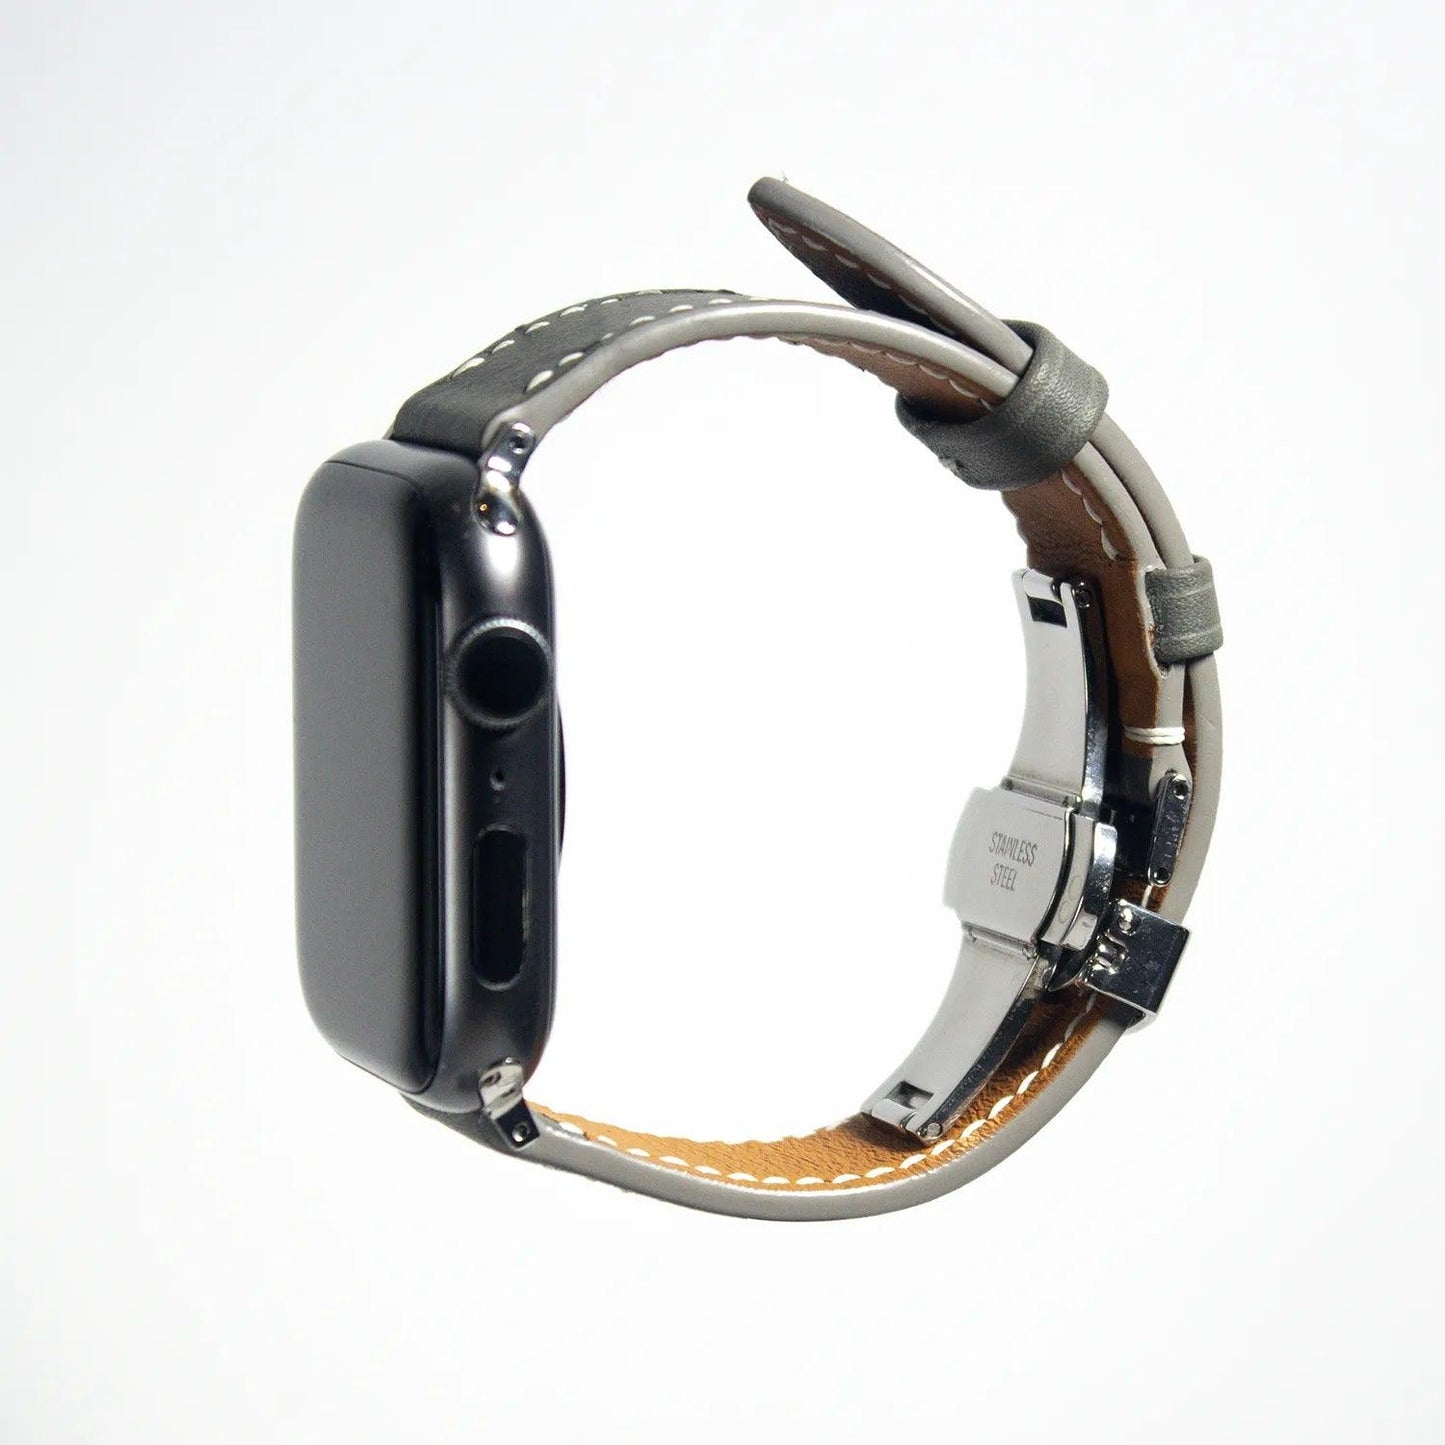 Sophisticated apple watch leather band made from grey Swift leather, combining elegance with durability.